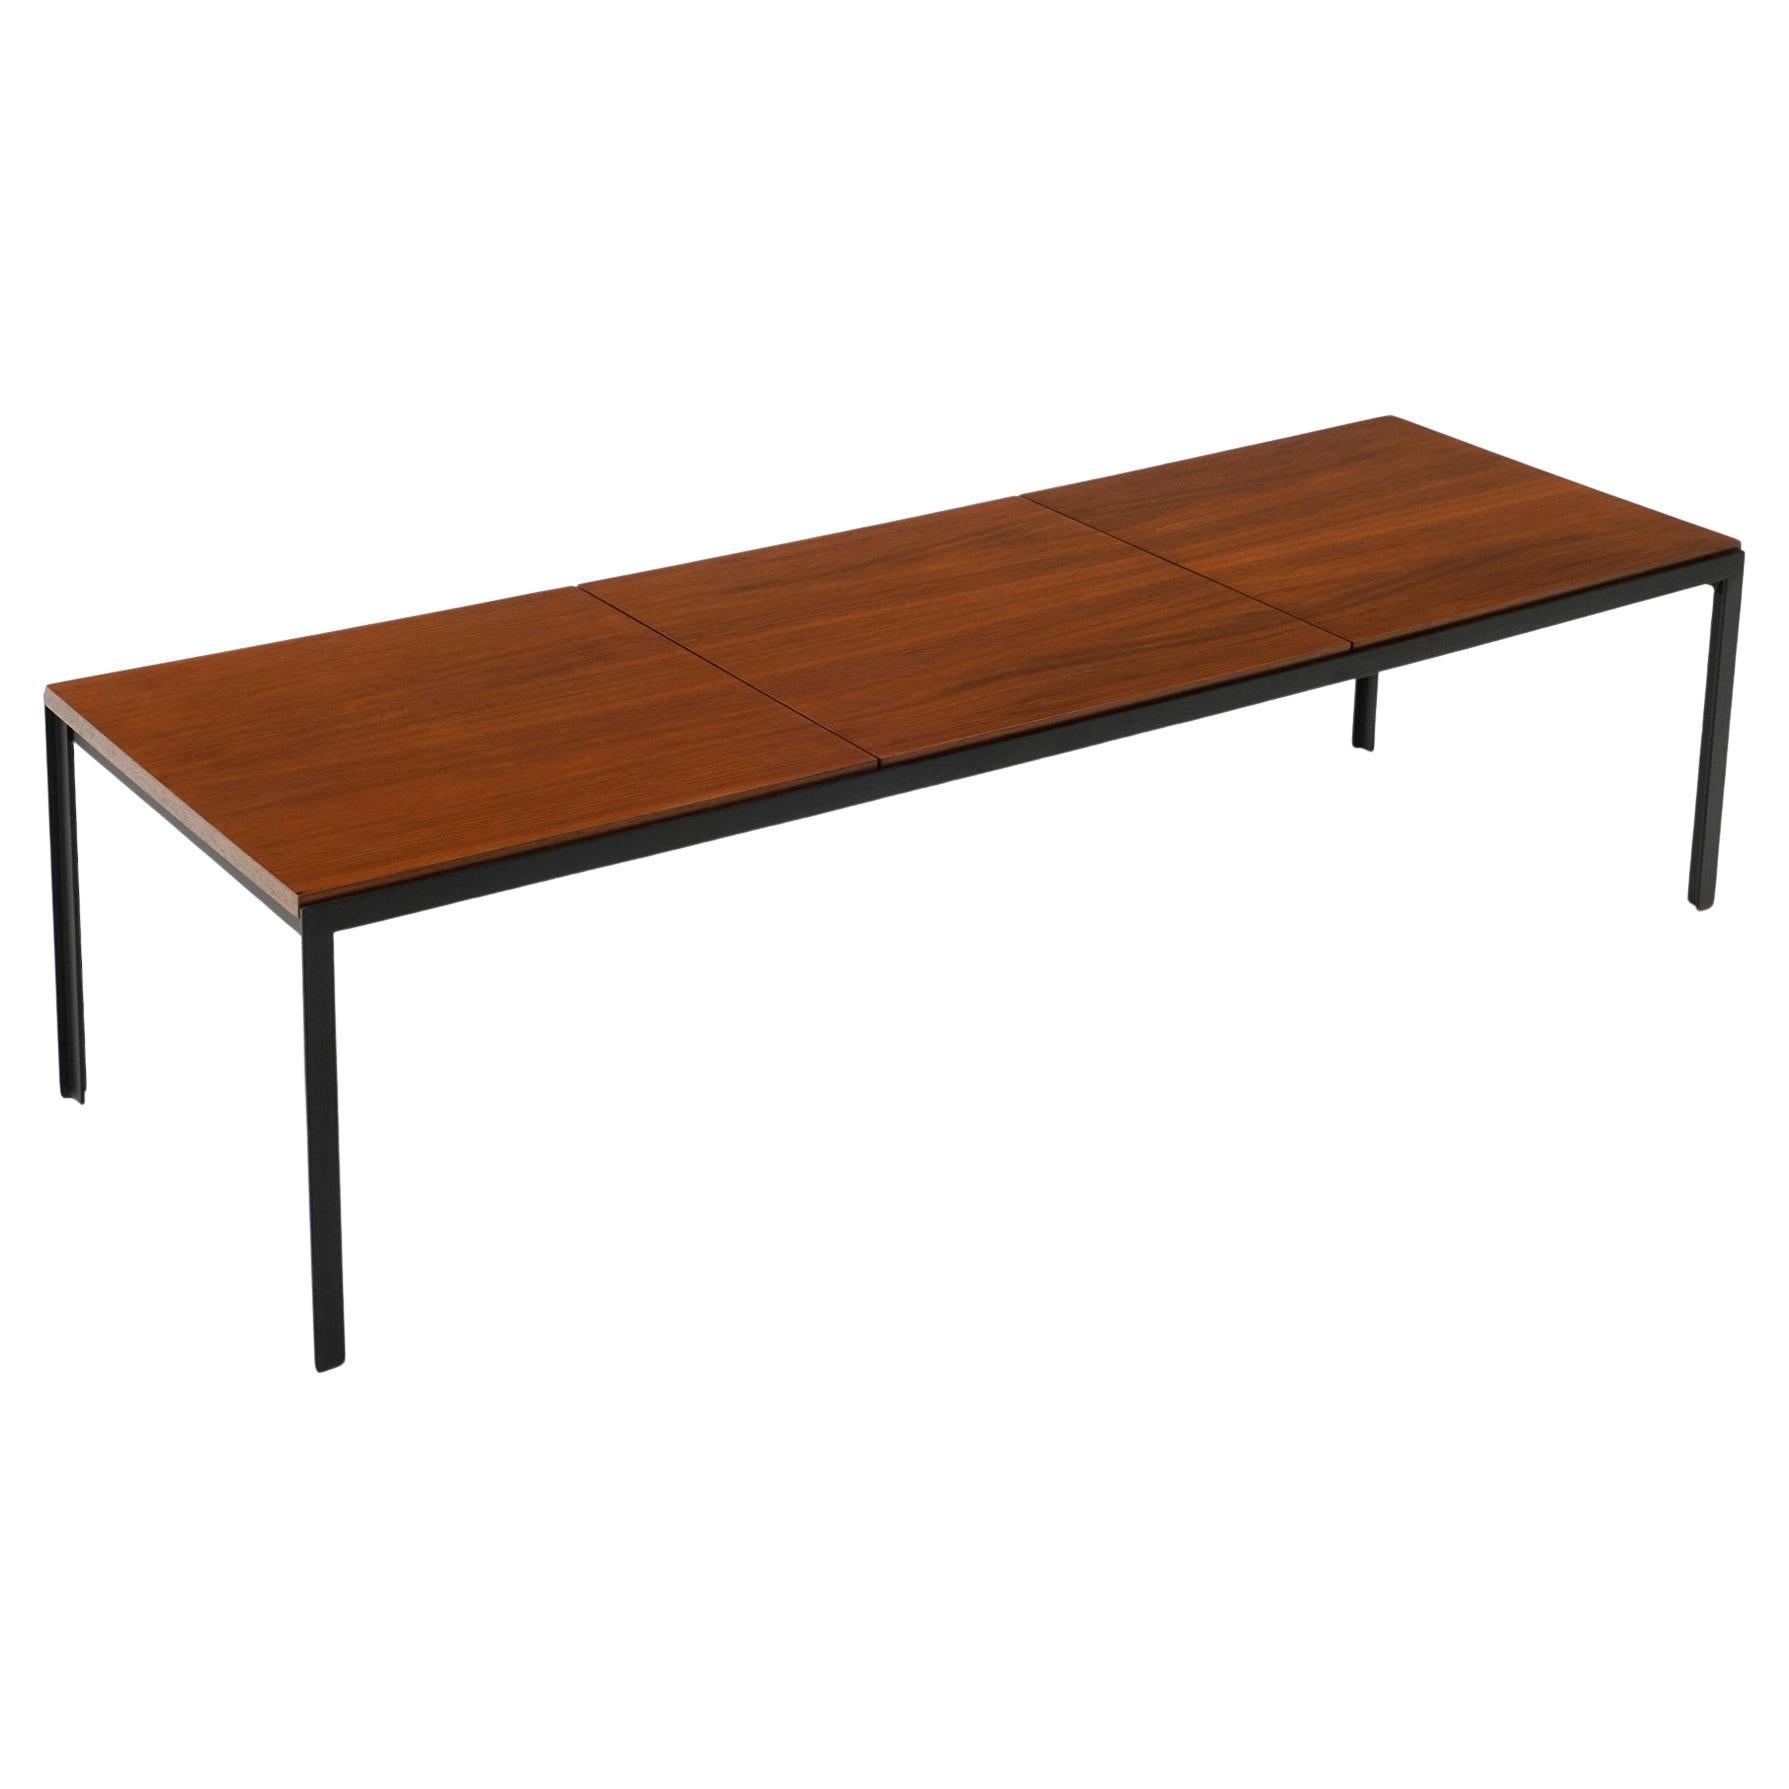 Bench or Coffee Table by Florence Knoll, Walnut and Black Angle Iron, Stunning